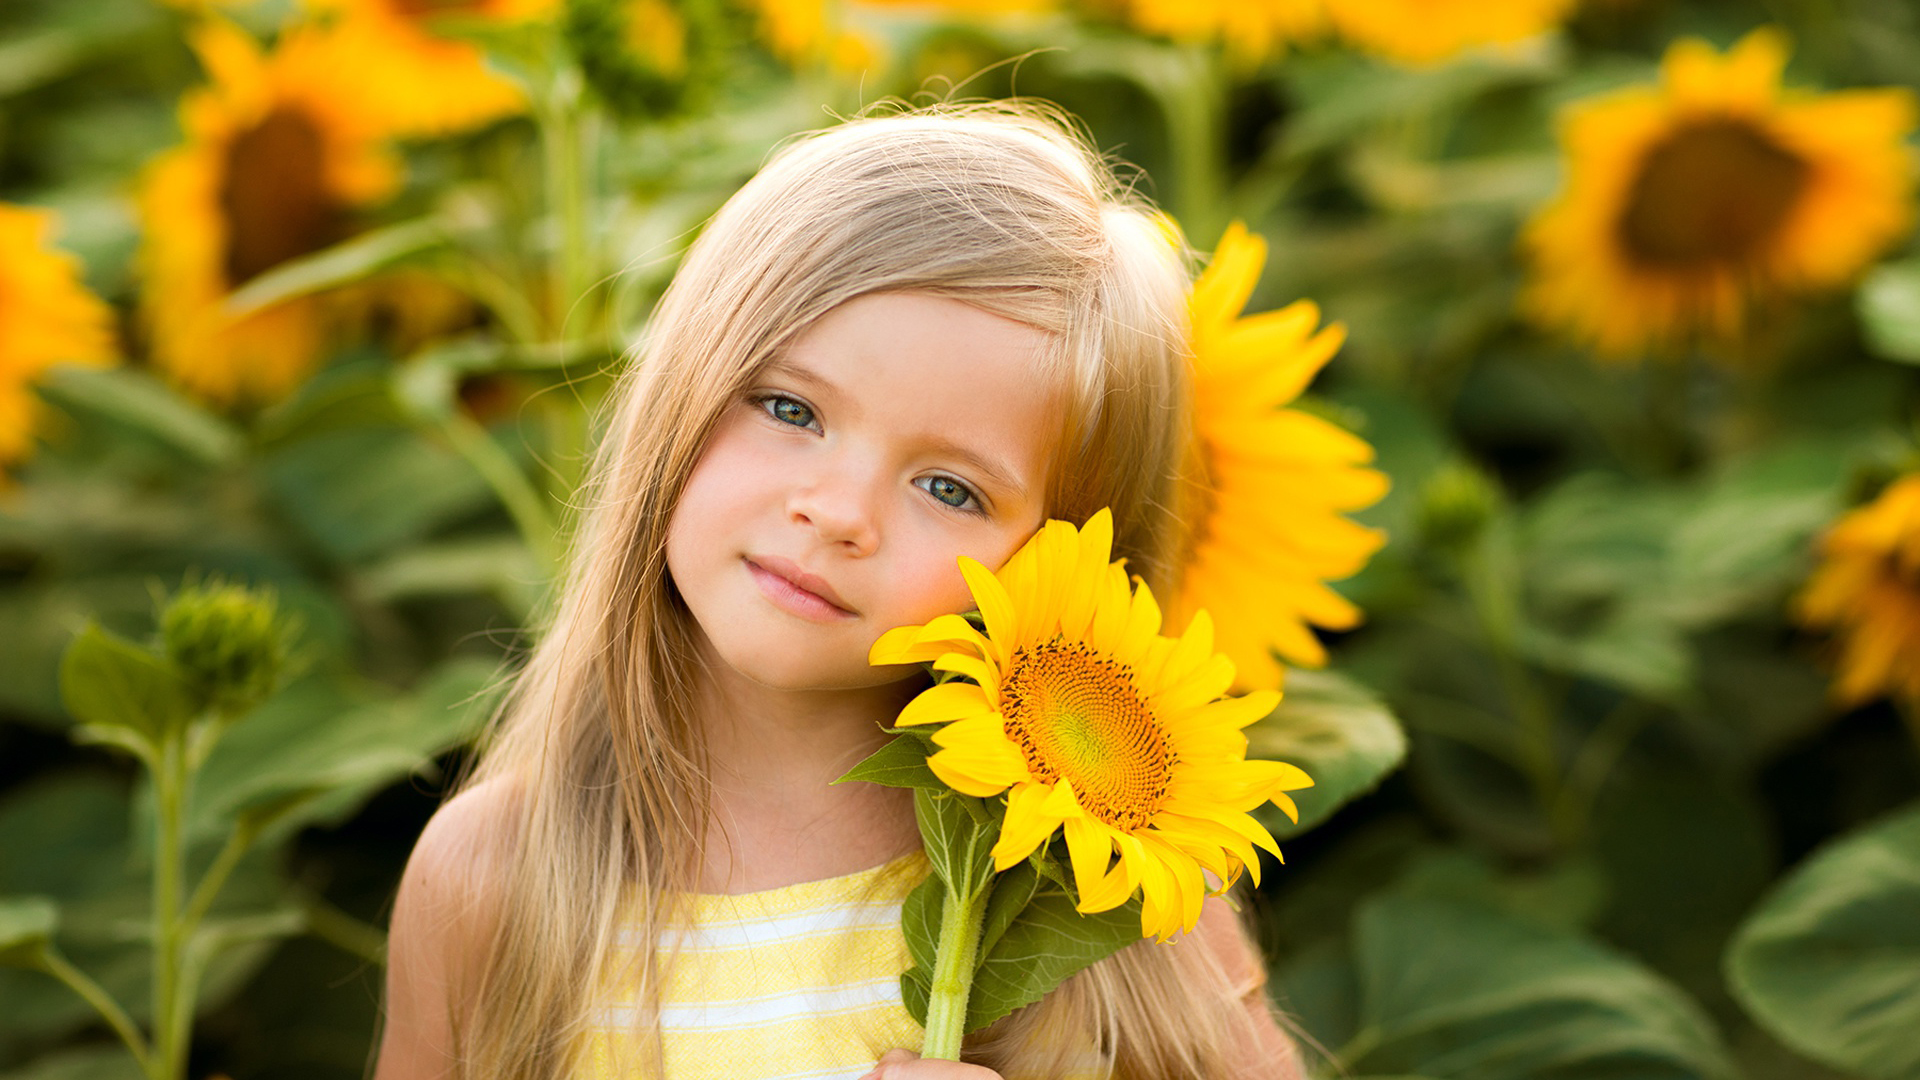 Blue Eyes Little Girl With Blonde Hair Is Wearing Yellow Stripes Dress With Sunflower In Hand In Sunflowers Wallpaper HD